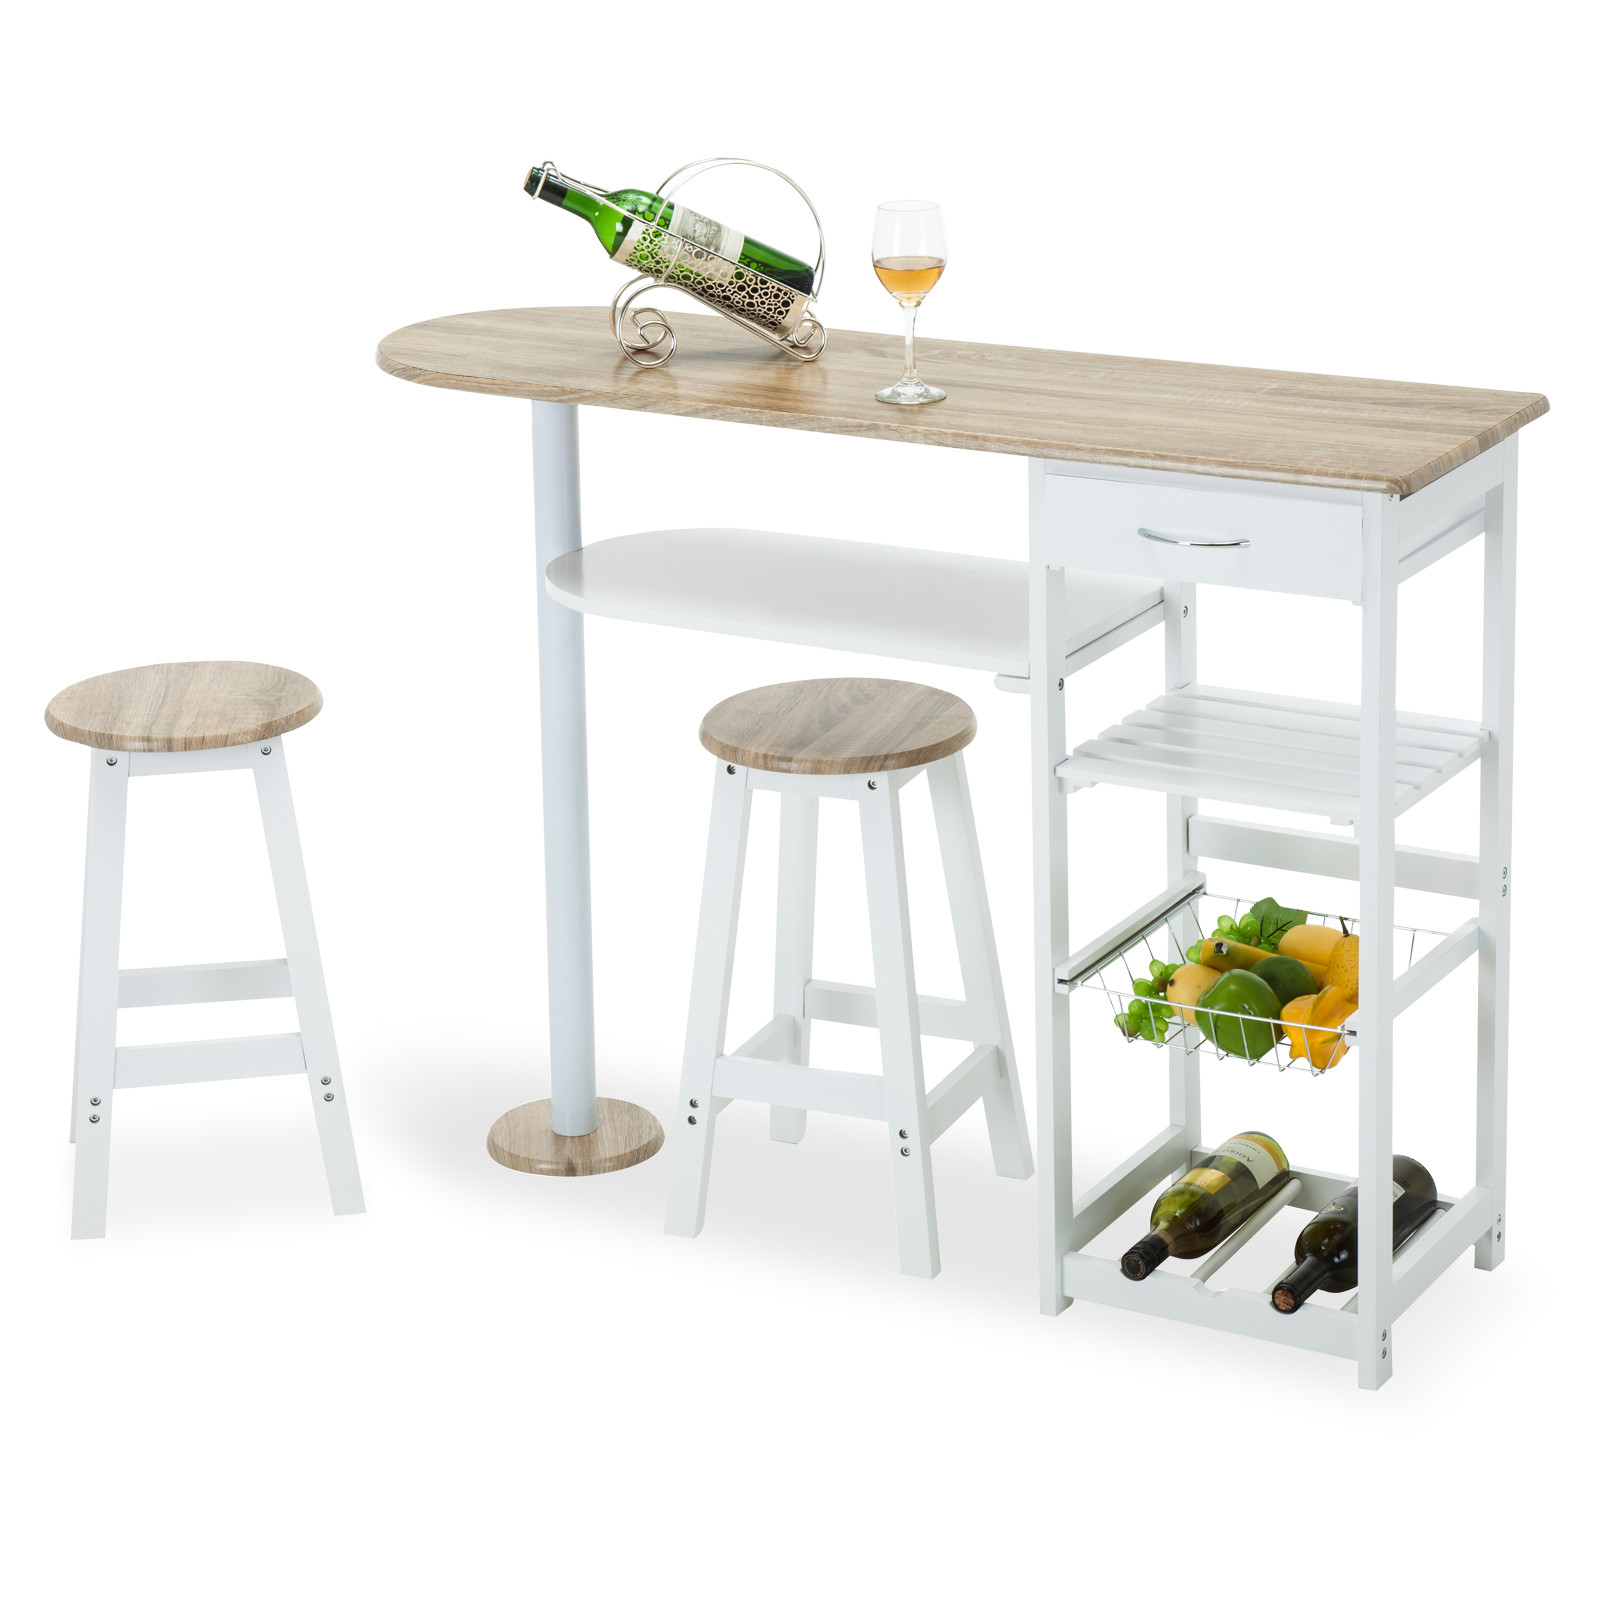 Kitchen Table With Storage
 Oak White Kitchen Island Cart Trolley Dining Table Storage